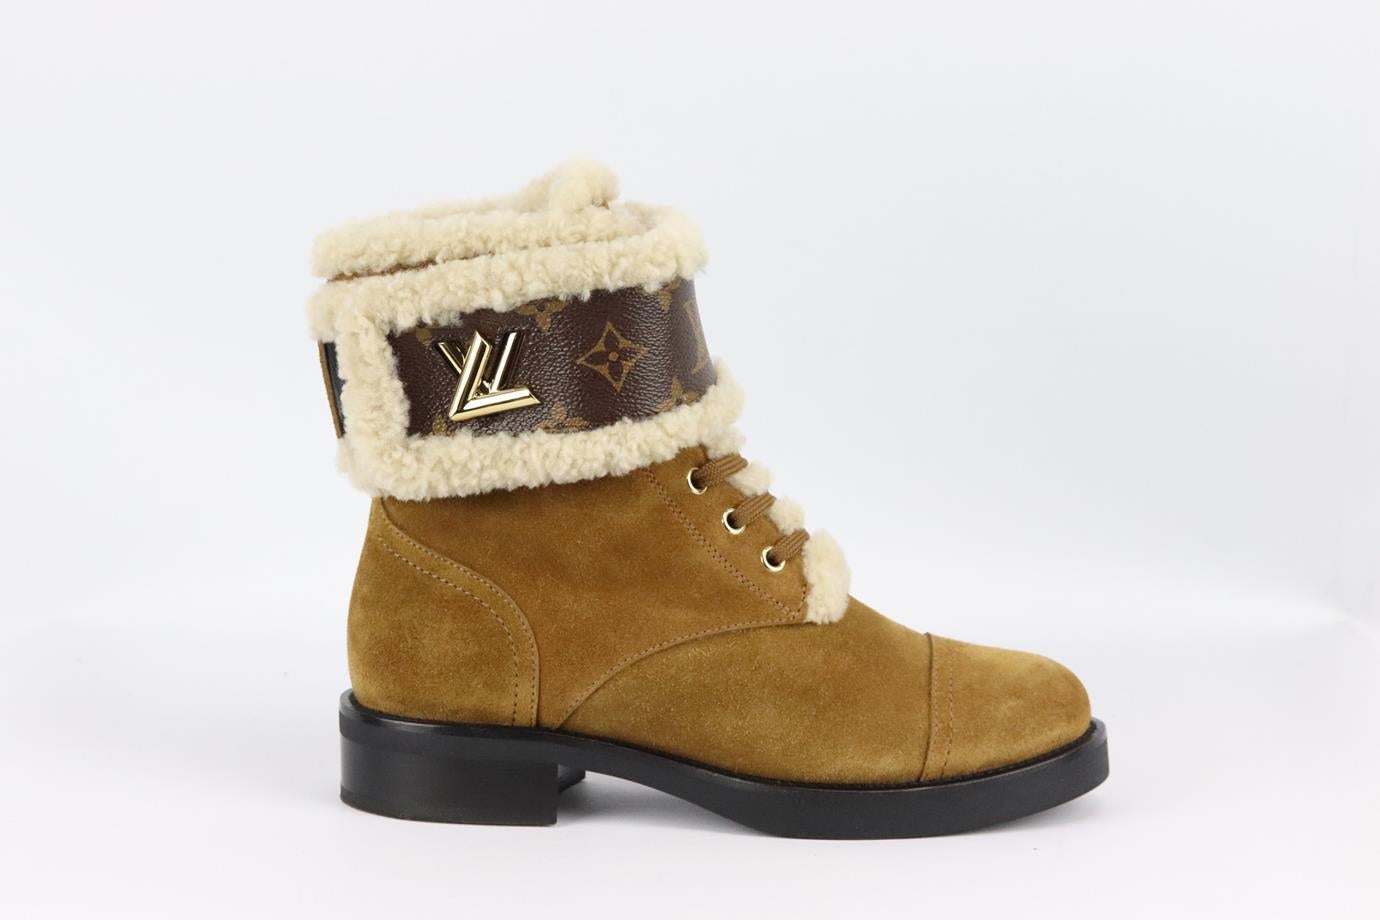 Louis Vuitton Wonderland shearling lined suede ankle boots. Brown and tan. Lace up fastening at front. Does not come with box or dustbag. Size: EU 38 (UK 5, US 8). Outersole: 10.2 in. Shaft: 6 in. Heel: 1.2 in. Very good condition - Worn once. Light